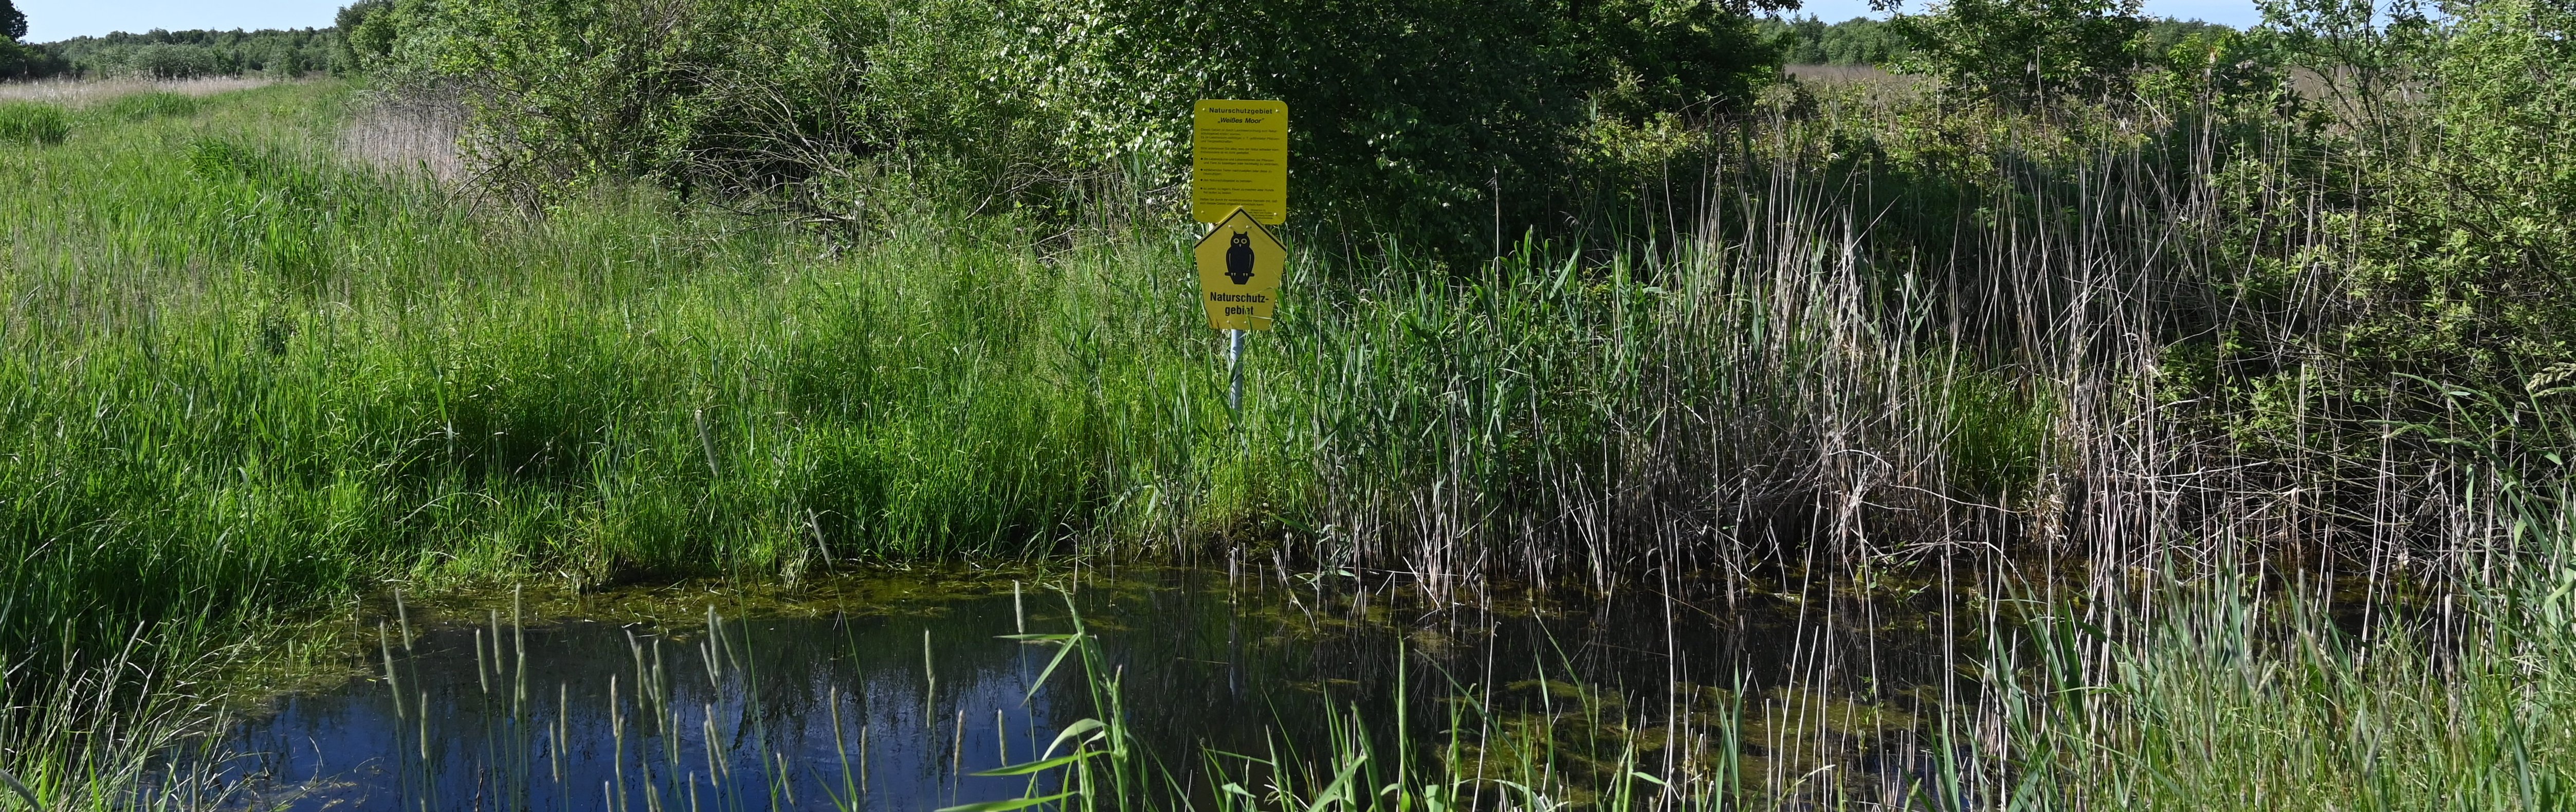 A pond with reeds on the shore, surrounded by bushes. On the opposite bank, a yellow sign with the words " Naturschutzgebiet" (nature reserve).